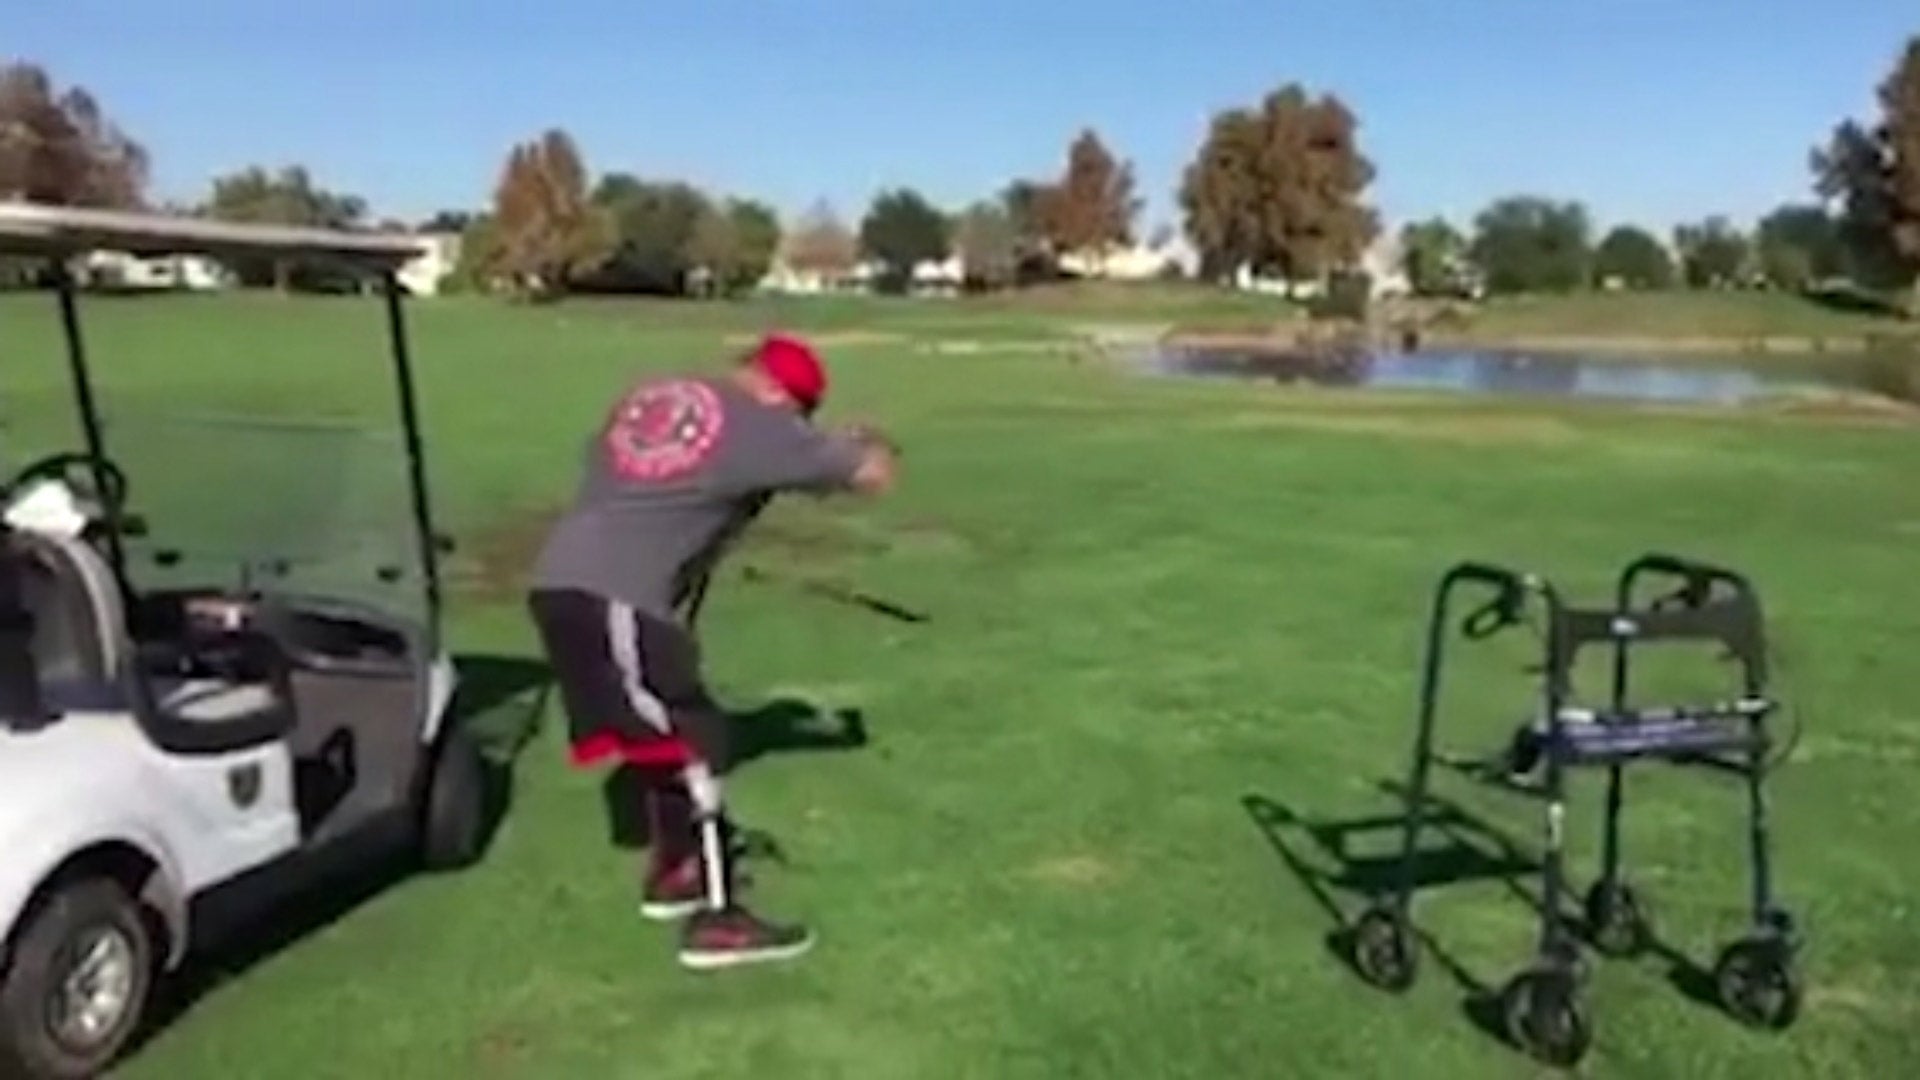 ABDUL NEVAREZ PLAYING GOLF STANDING UP WITHOUT WHEELCHAIR. HE SWINGS AND FALLS BACK BREAKING HIS LEFT WRIST